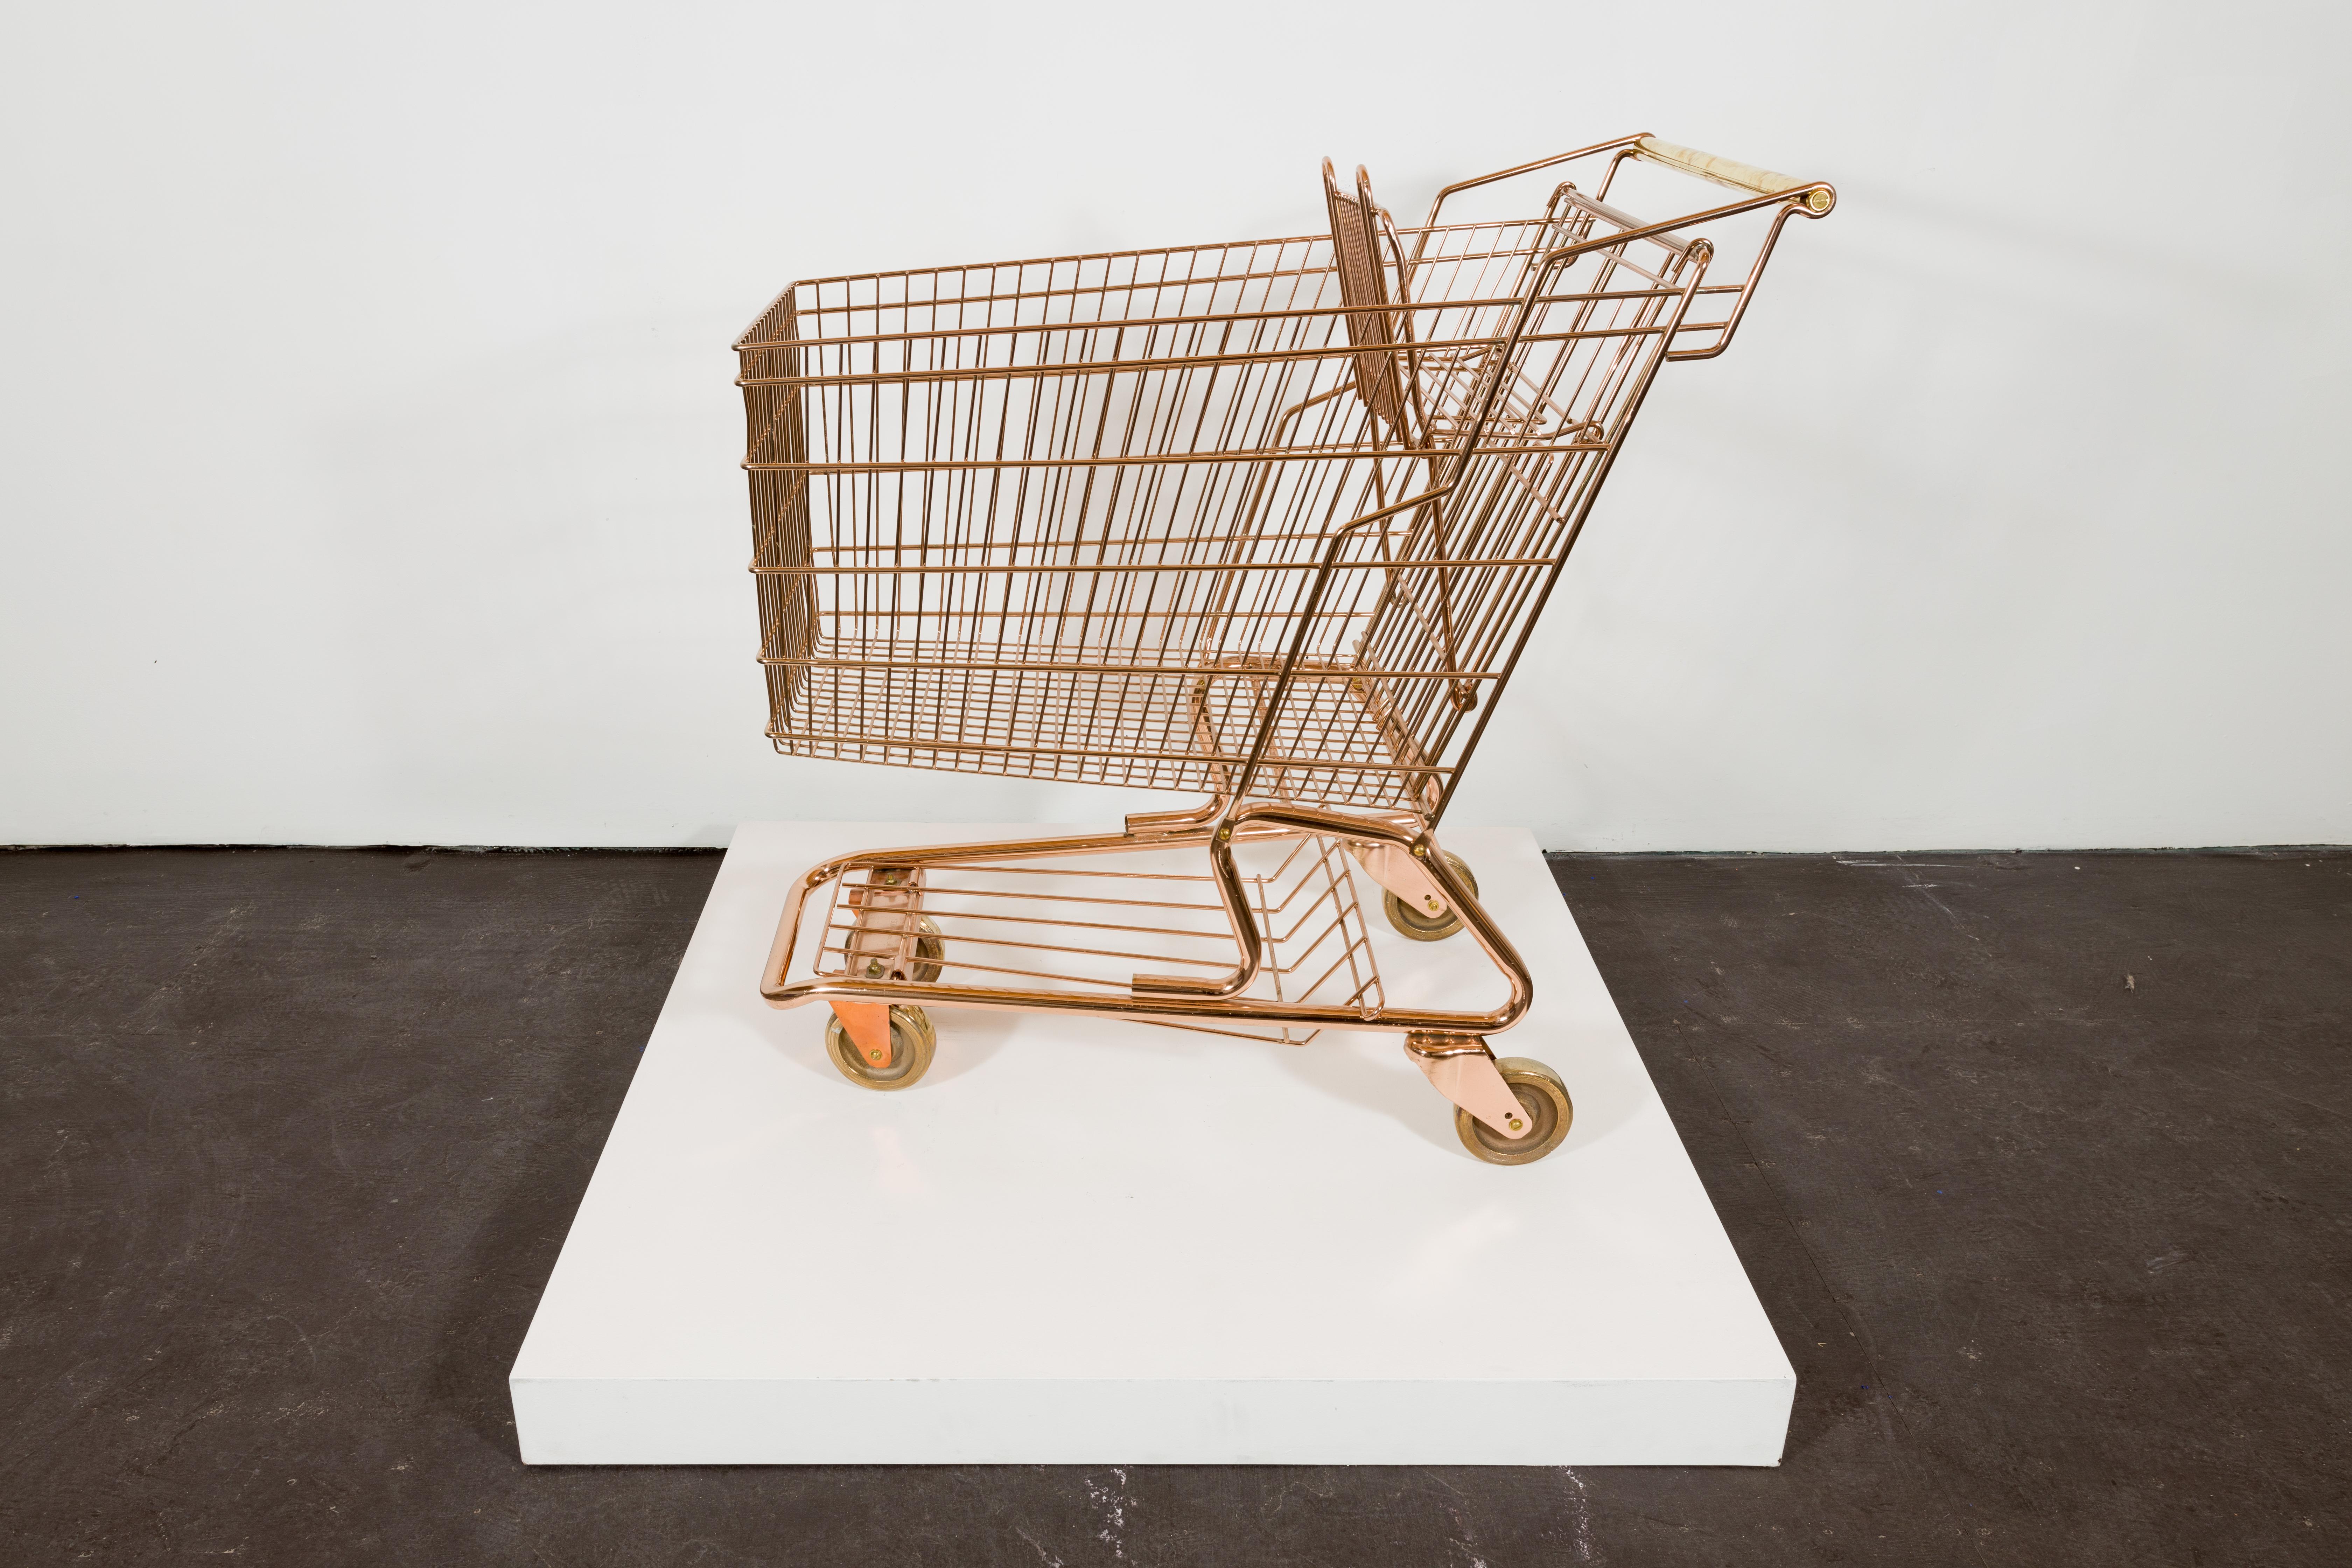 Shopping Cart - Sculpture by Zeke Moores